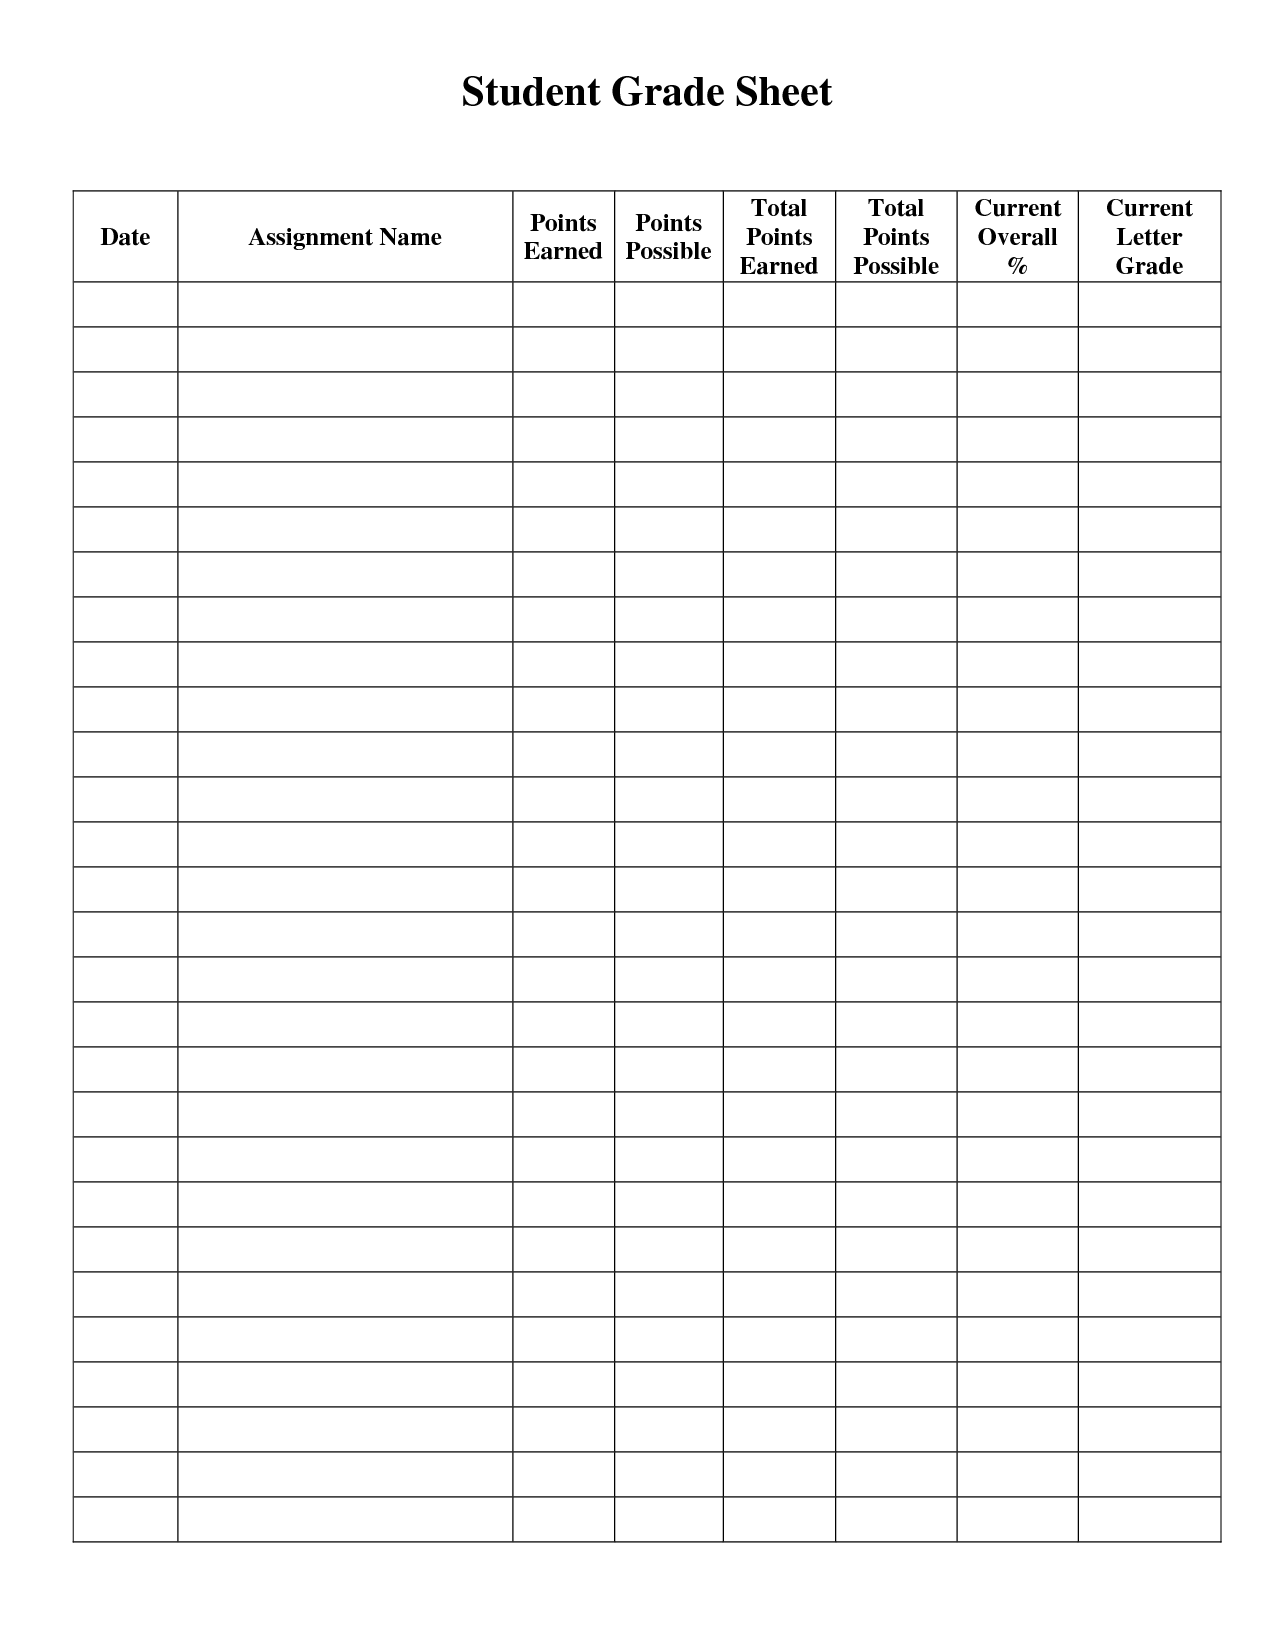 7-best-images-of-printable-grade-sheet-for-students-student-grade